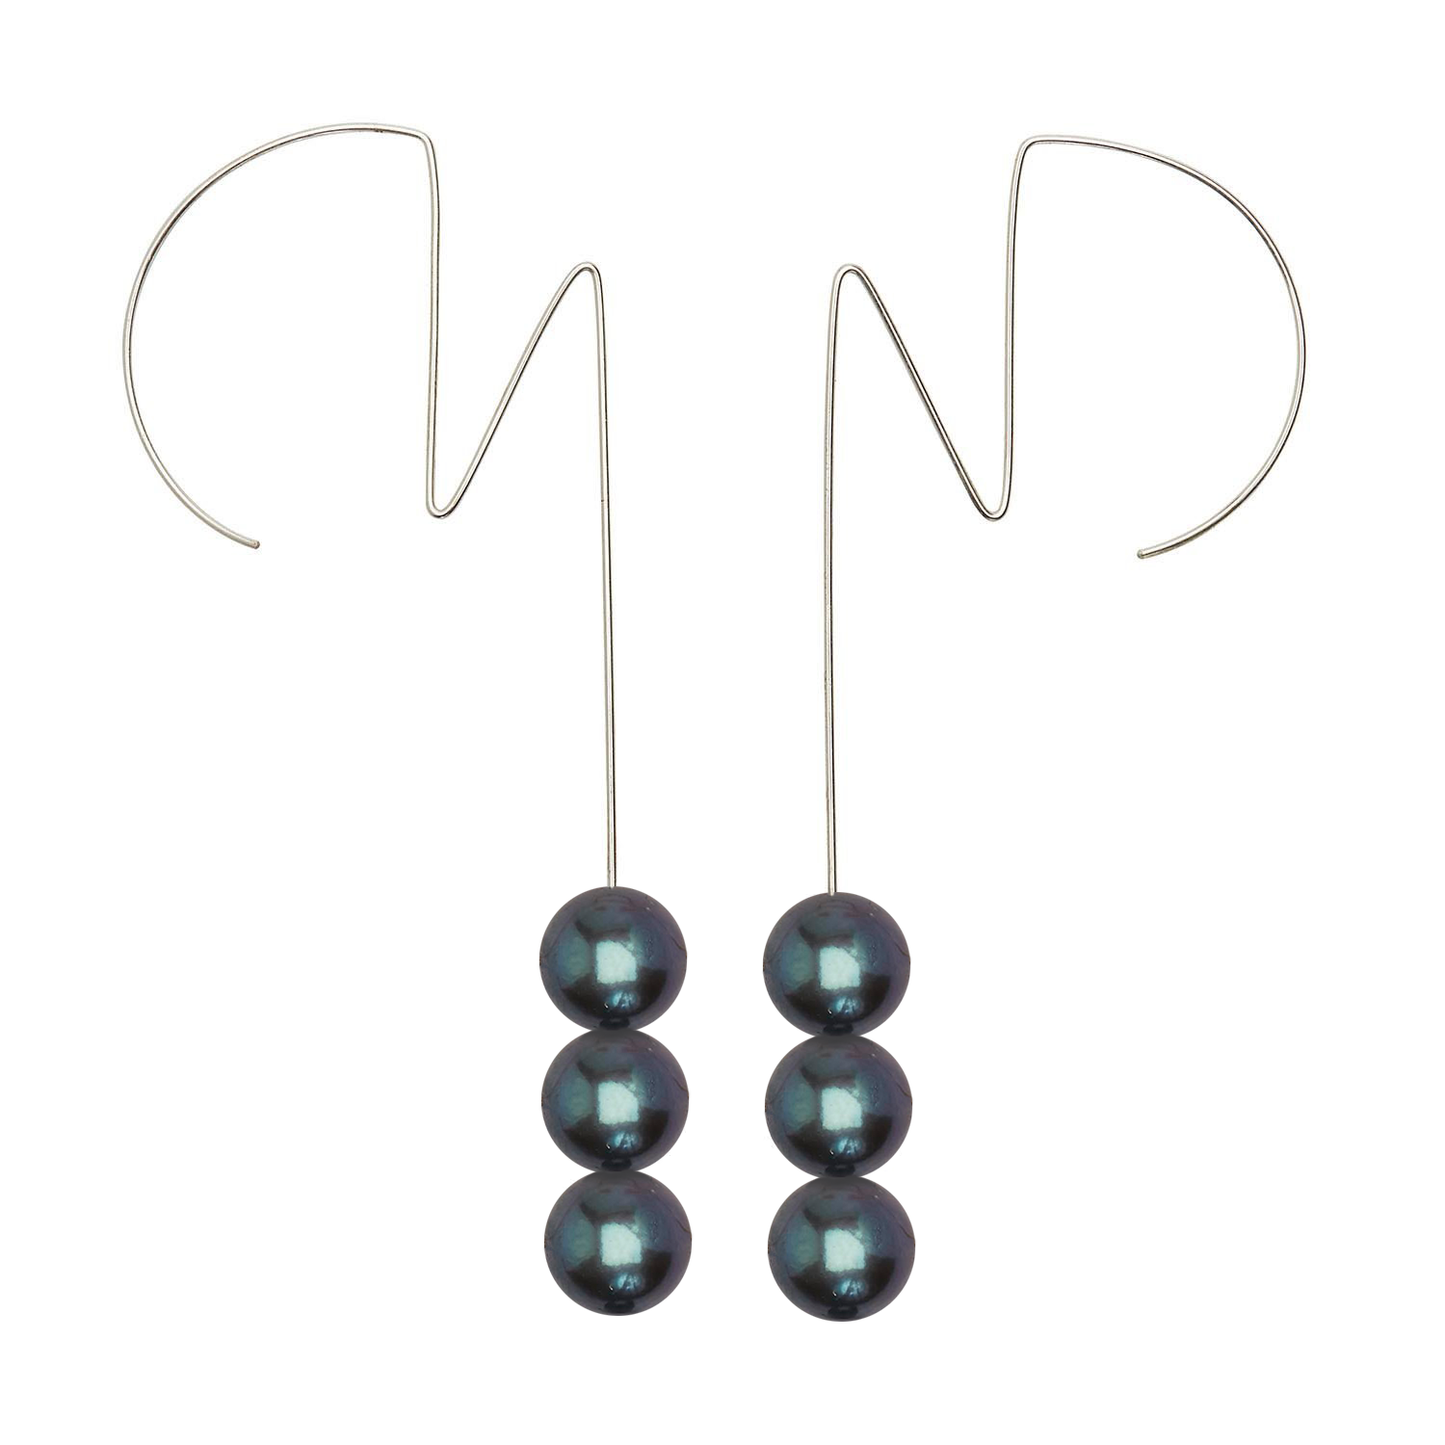 Large Round Ziggy Stardust inspired Earrings with Freshwater Pearls